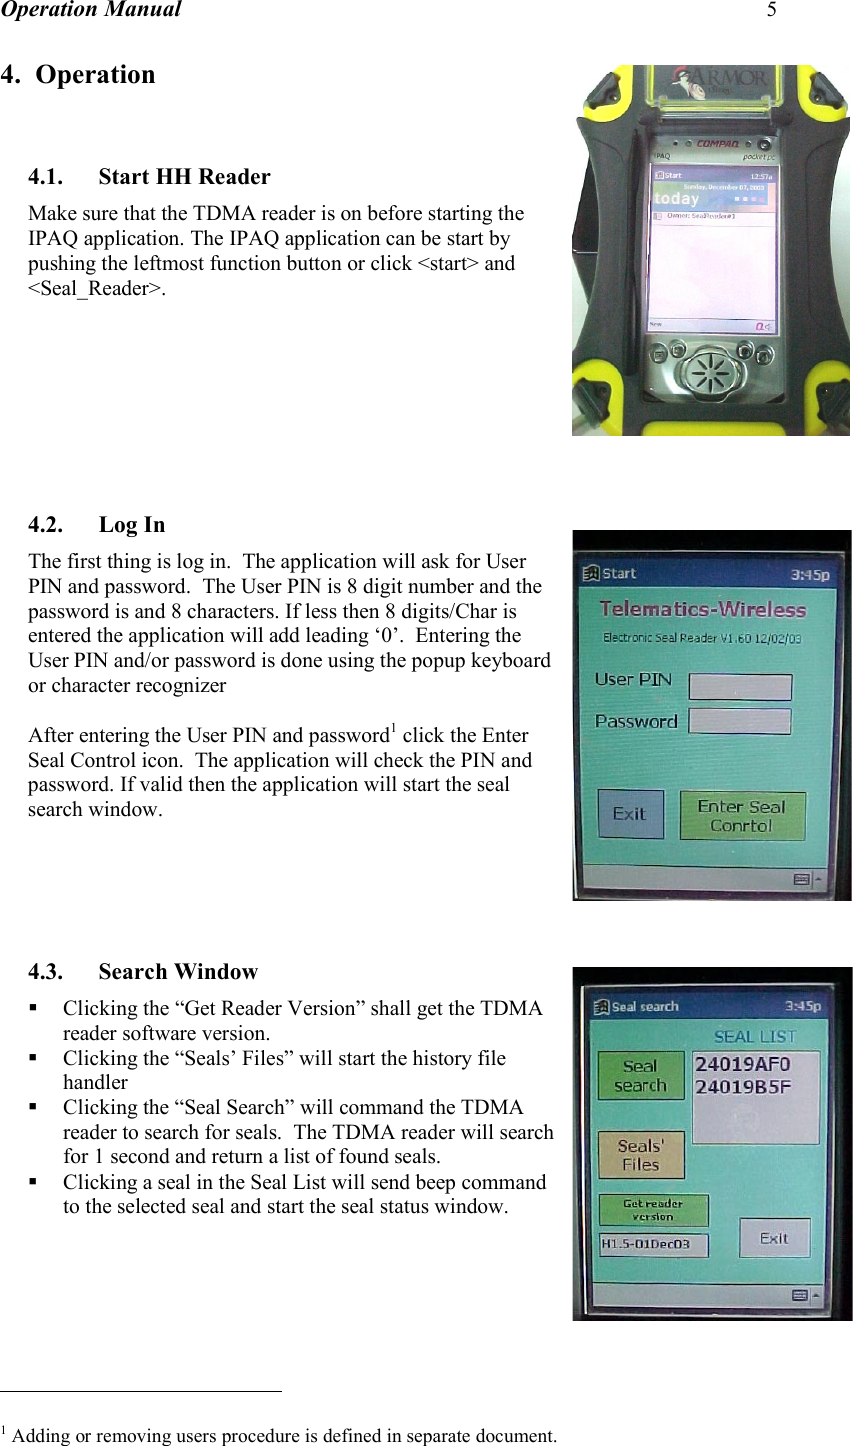 Operation Manual 5  4. Operation   4.1. Start HH Reader Make sure that the TDMA reader is on before starting the IPAQ application. The IPAQ application can be start by pushing the leftmost function button or click &lt;start&gt; and &lt;Seal_Reader&gt;.          4.2. Log In The first thing is log in.  The application will ask for User PIN and password.  The User PIN is 8 digit number and the password is and 8 characters. If less then 8 digits/Char is entered the application will add leading ‘0’.  Entering the User PIN and/or password is done using the popup keyboard or character recognizer   After entering the User PIN and password1 click the Enter Seal Control icon.  The application will check the PIN and password. If valid then the application will start the seal search window.      4.3. Search Window  Clicking the “Get Reader Version” shall get the TDMA reader software version.  Clicking the “Seals’ Files” will start the history file handler  Clicking the “Seal Search” will command the TDMA reader to search for seals.  The TDMA reader will search for 1 second and return a list of found seals.  Clicking a seal in the Seal List will send beep command to the selected seal and start the seal status window.                                                        1 Adding or removing users procedure is defined in separate document. 